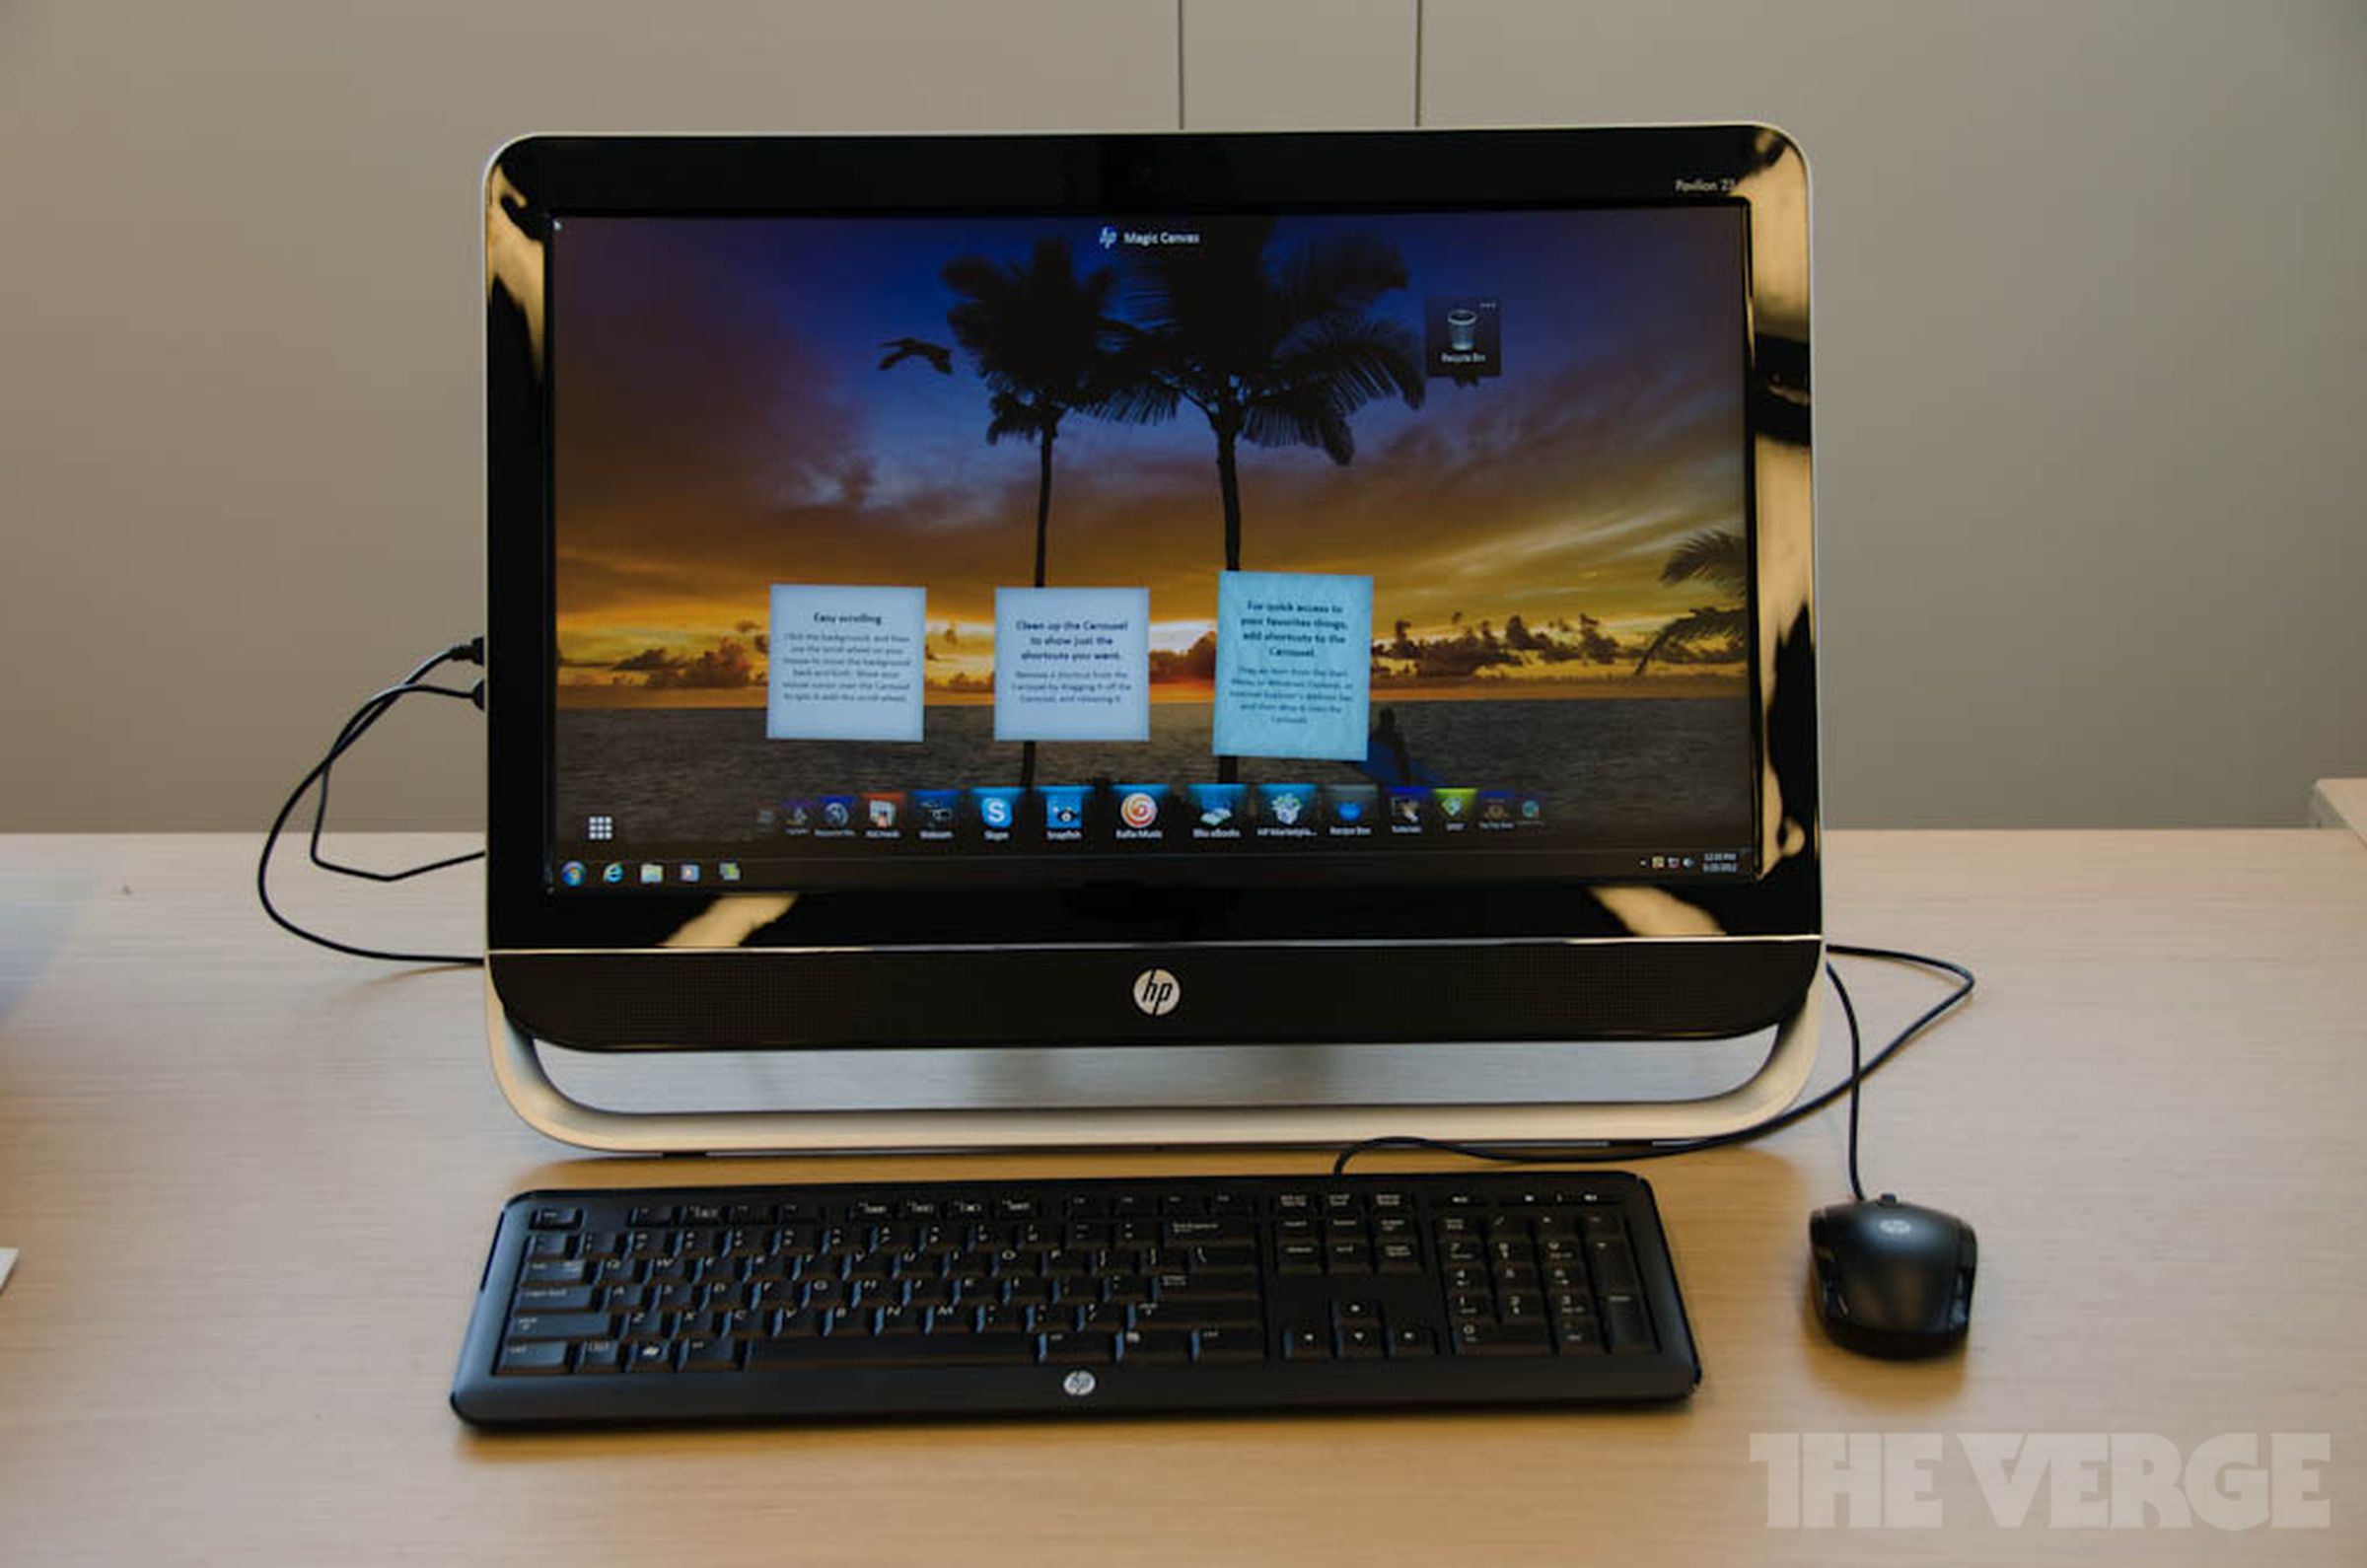 HP Envy 23 and Pavilion 23 hands-on pictures